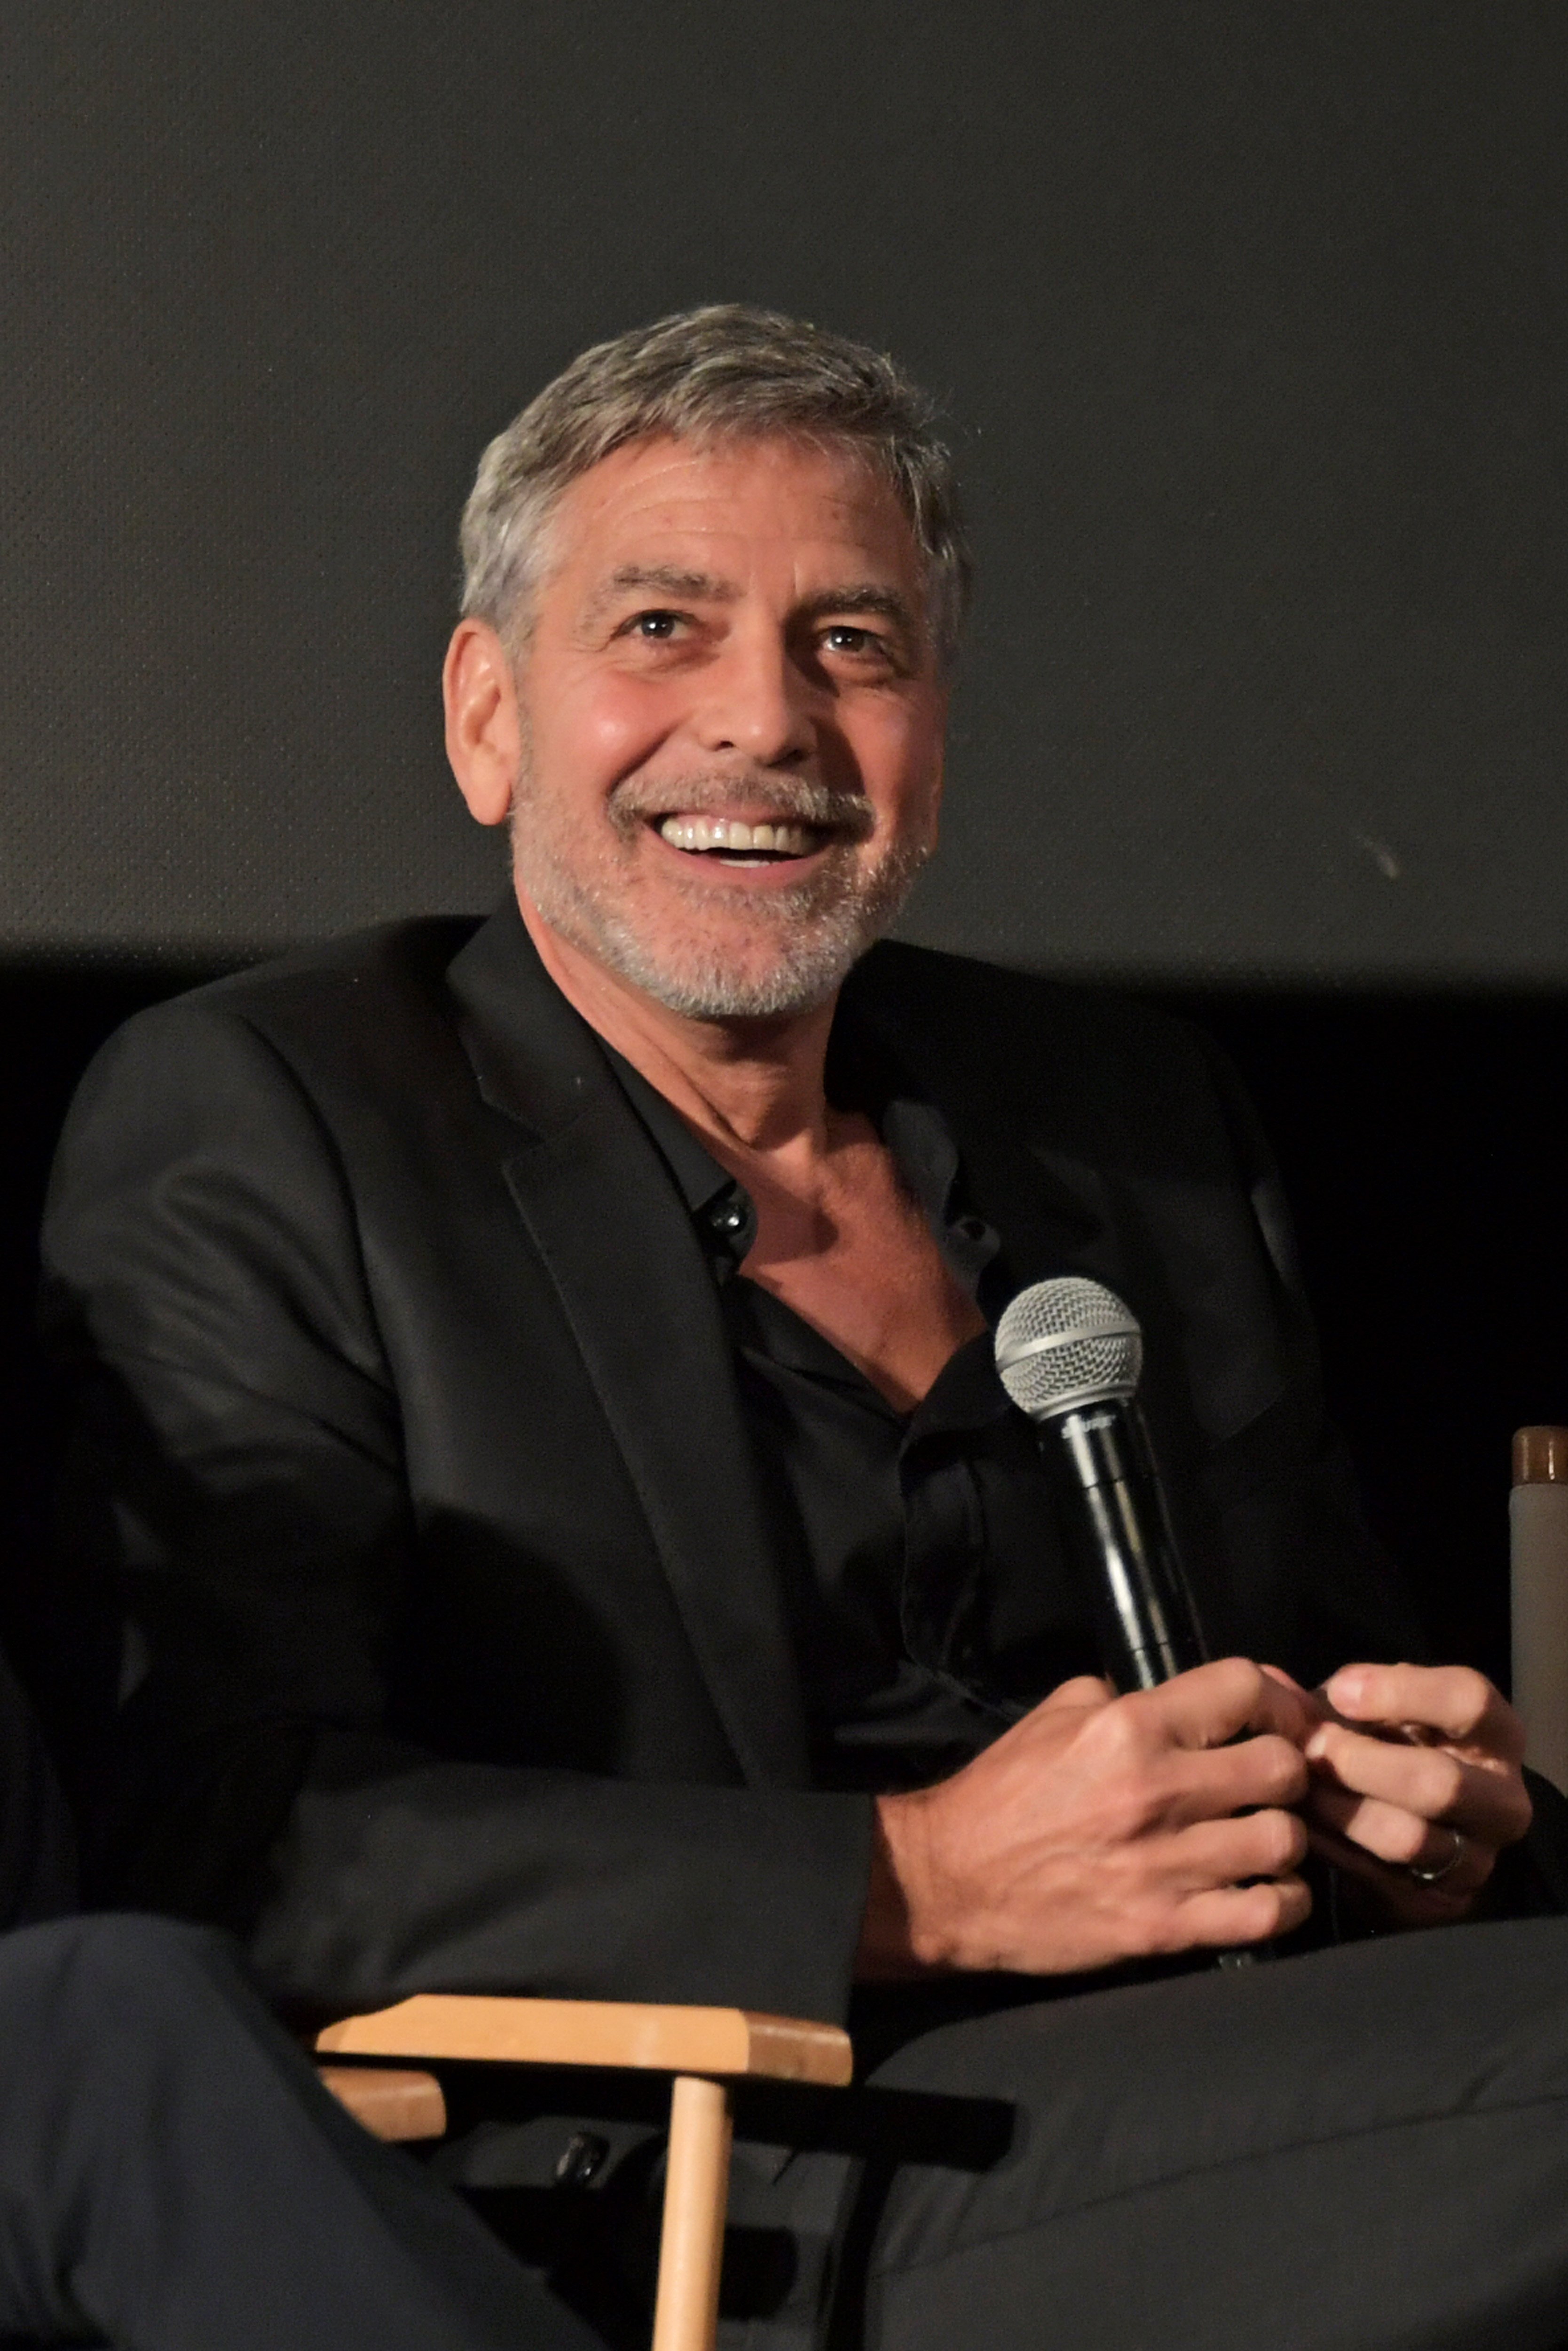 George Clooney at the premiere of the new Channel 4 show "Catch-22" at Vue Westfield on May 15, 2019, in London, England | Source: Getty Images